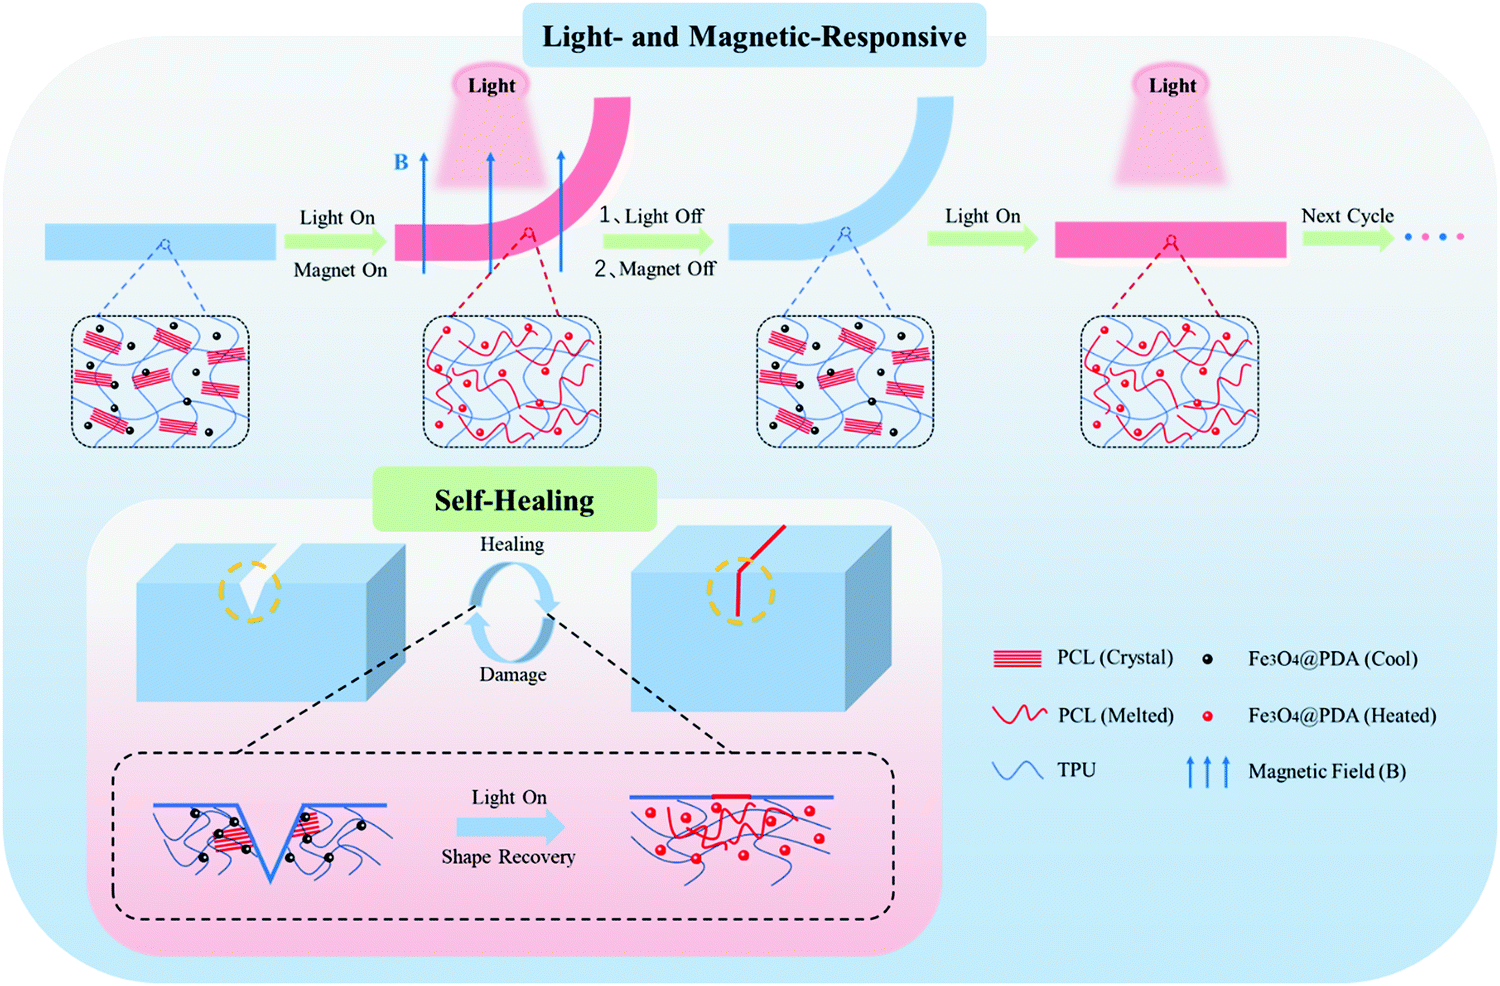 Light- and magnetic-responsive synergy controlled reconfiguration 